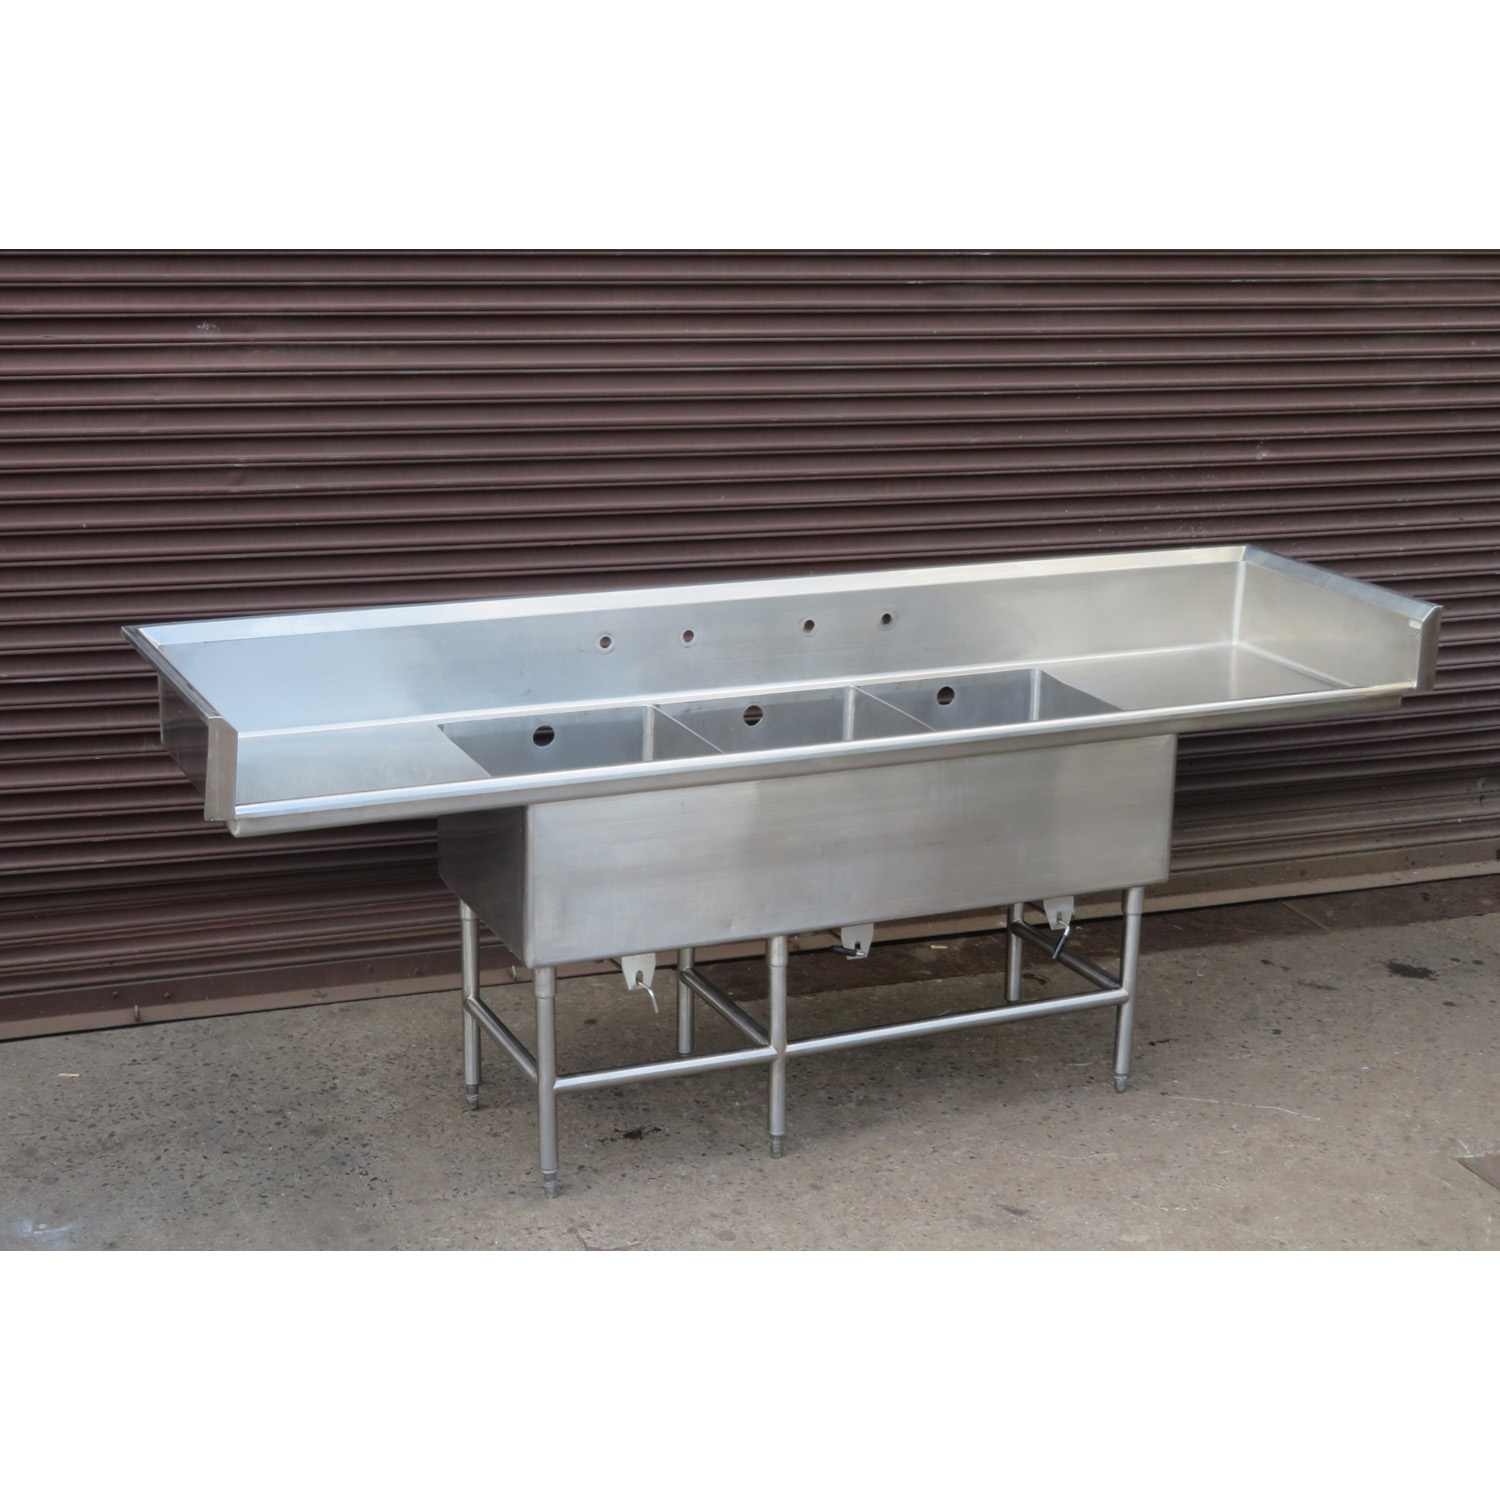 Sink 3 Compartment with 2 Drain Boards, Used Excellent Condition